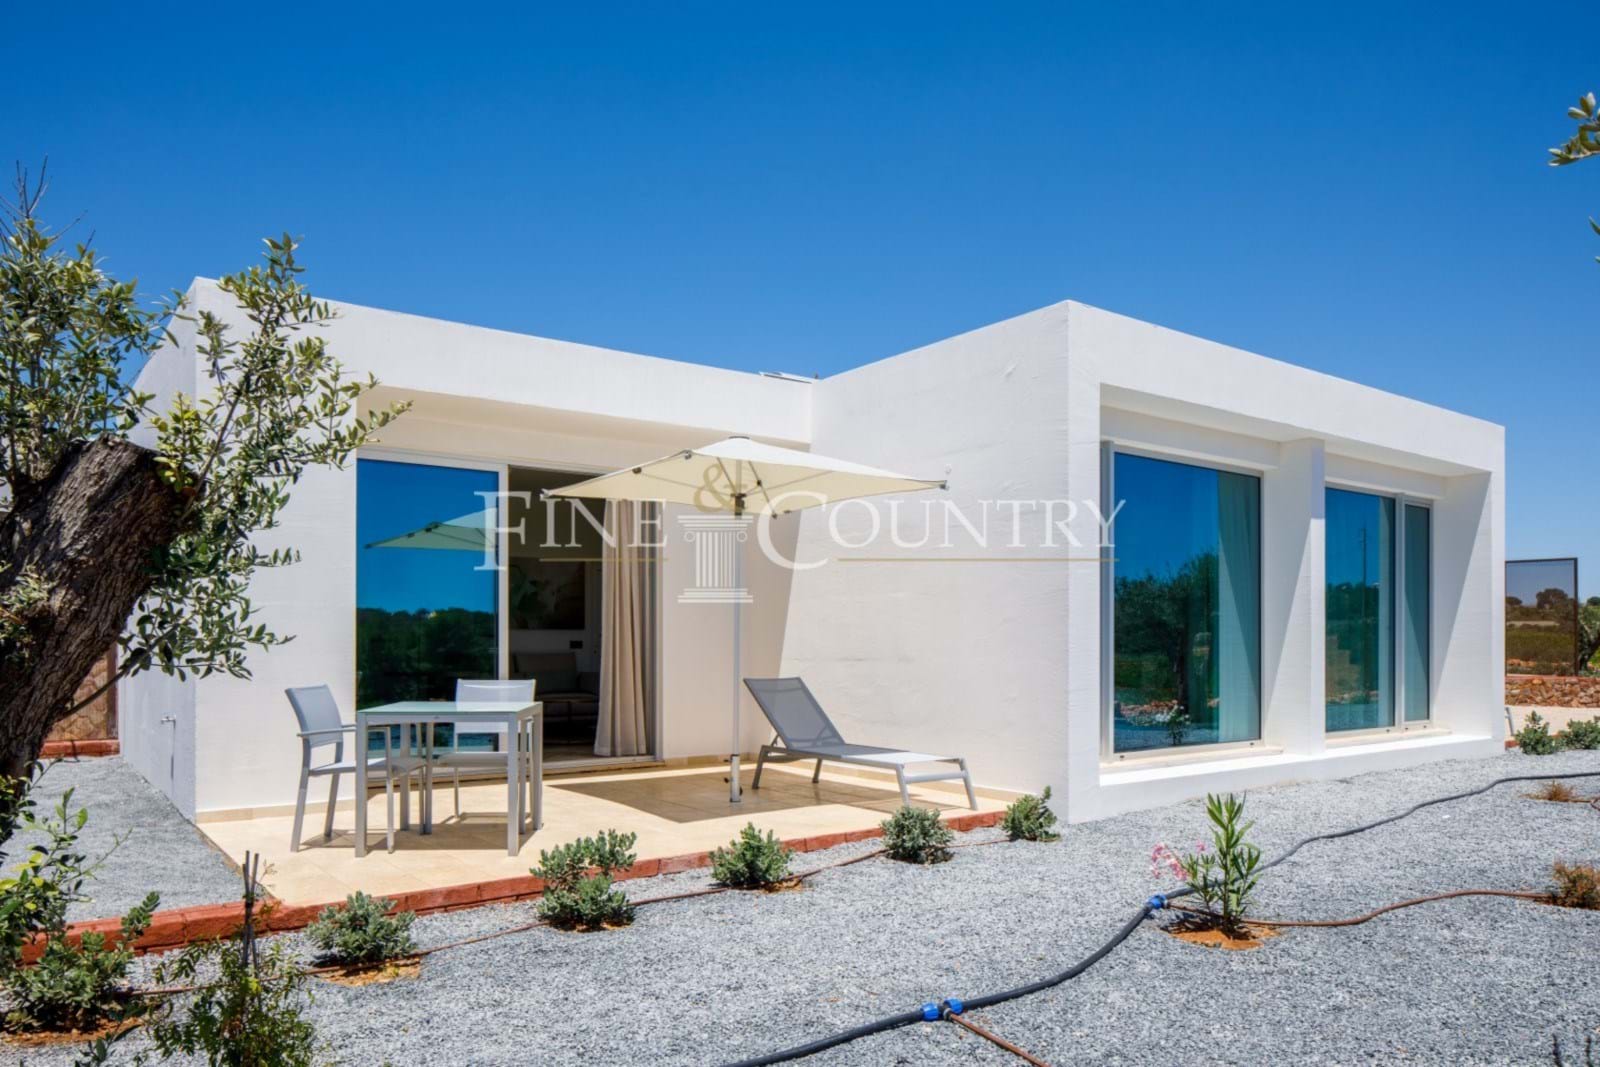 Carvoeiro/Lagoa - The Vines Holiday Home & Investment Properties Accommodation in Lagoa